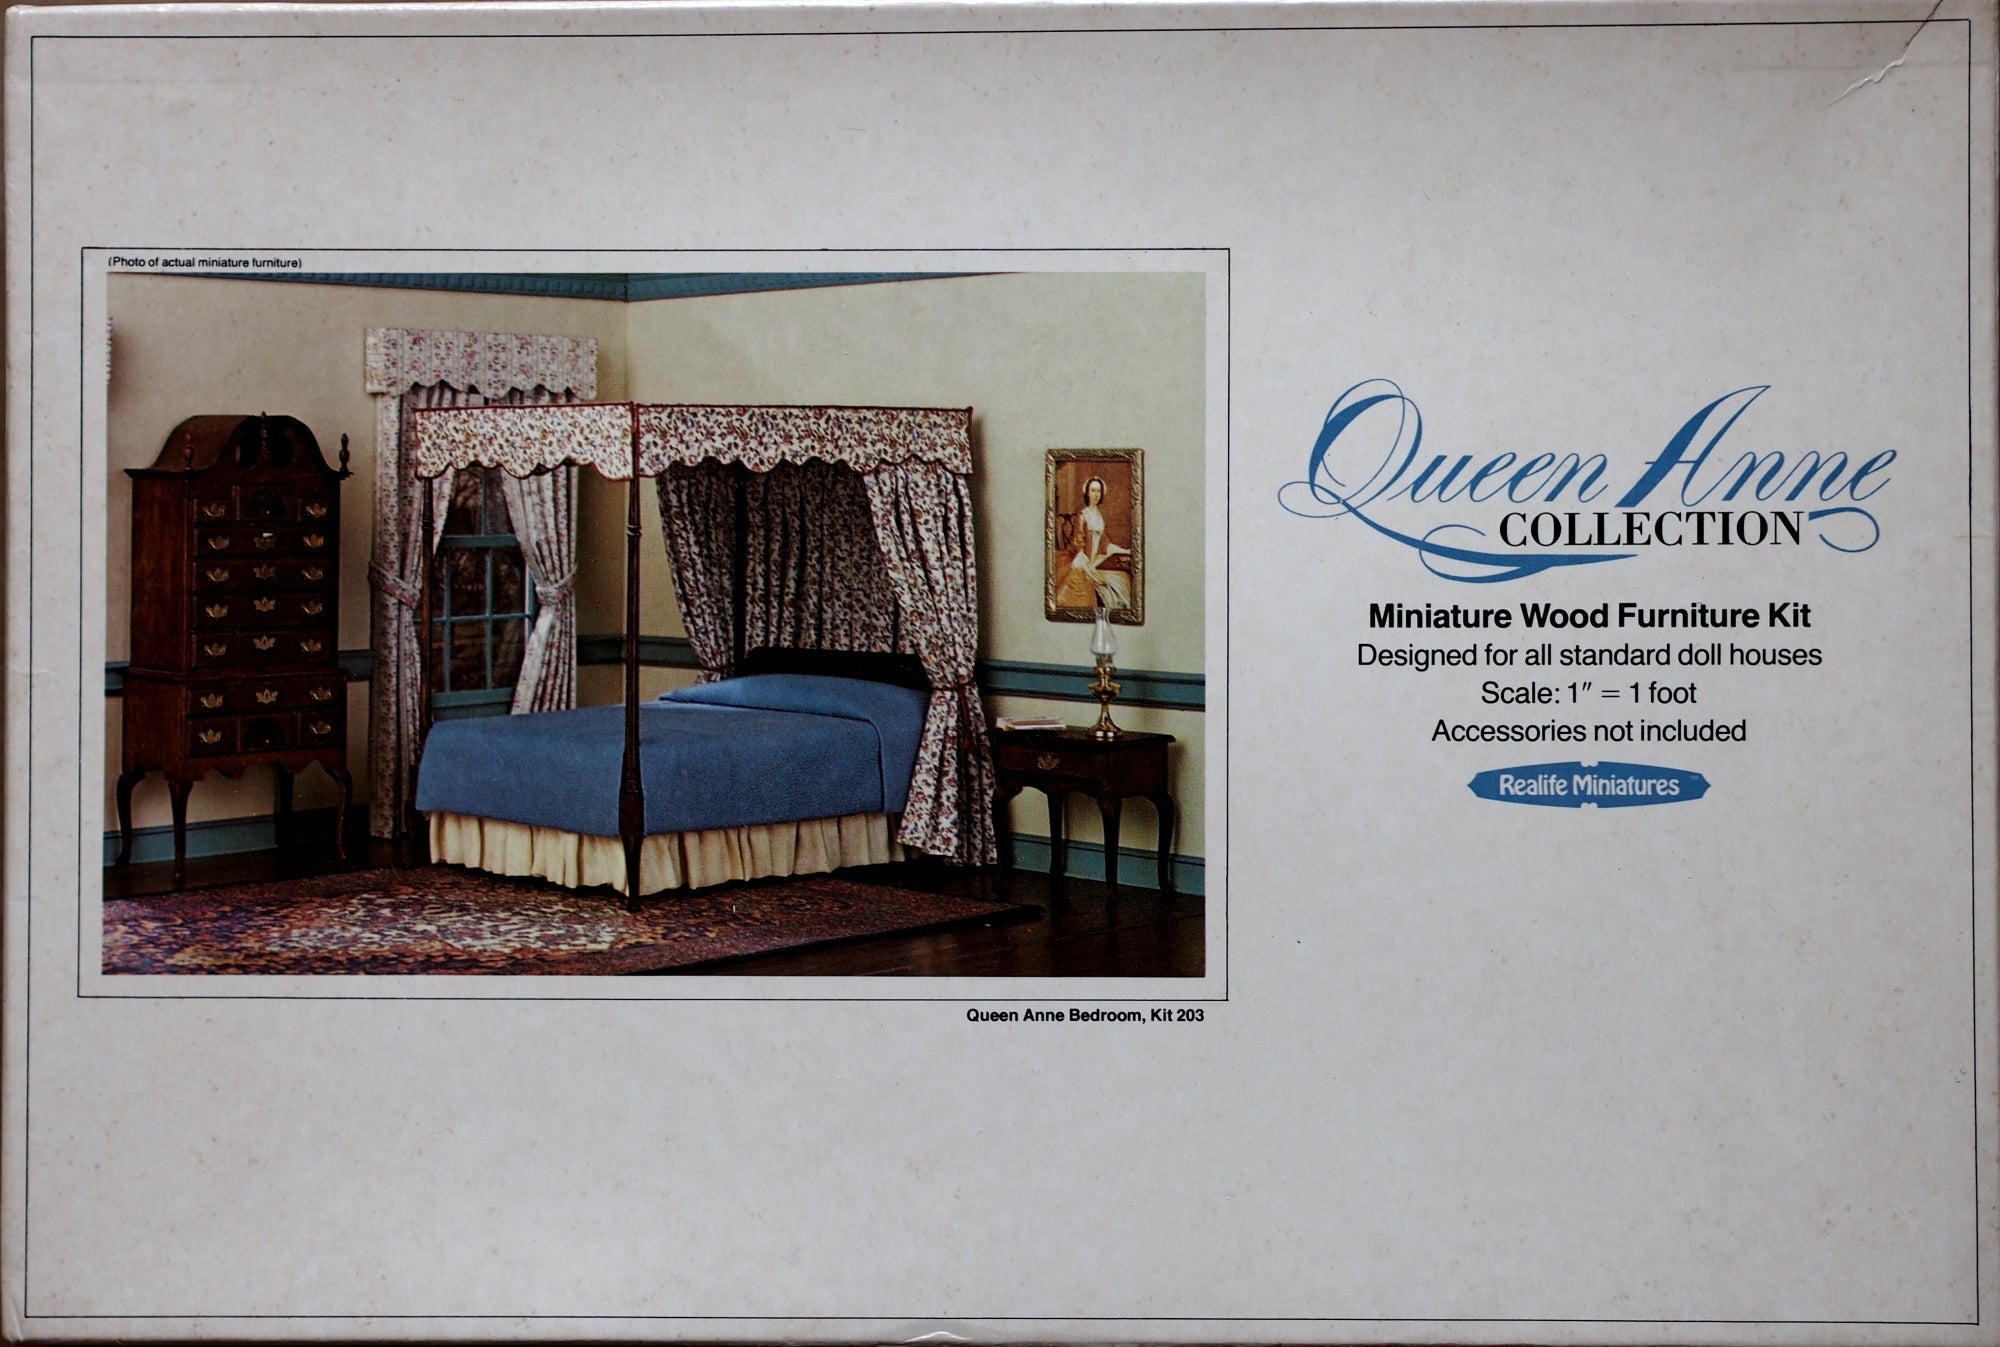 Realife Miniature Furniture Kit # 203 Queen Anne Collection Bedroom DIY Dollhouse by Scientific Models Miniatures